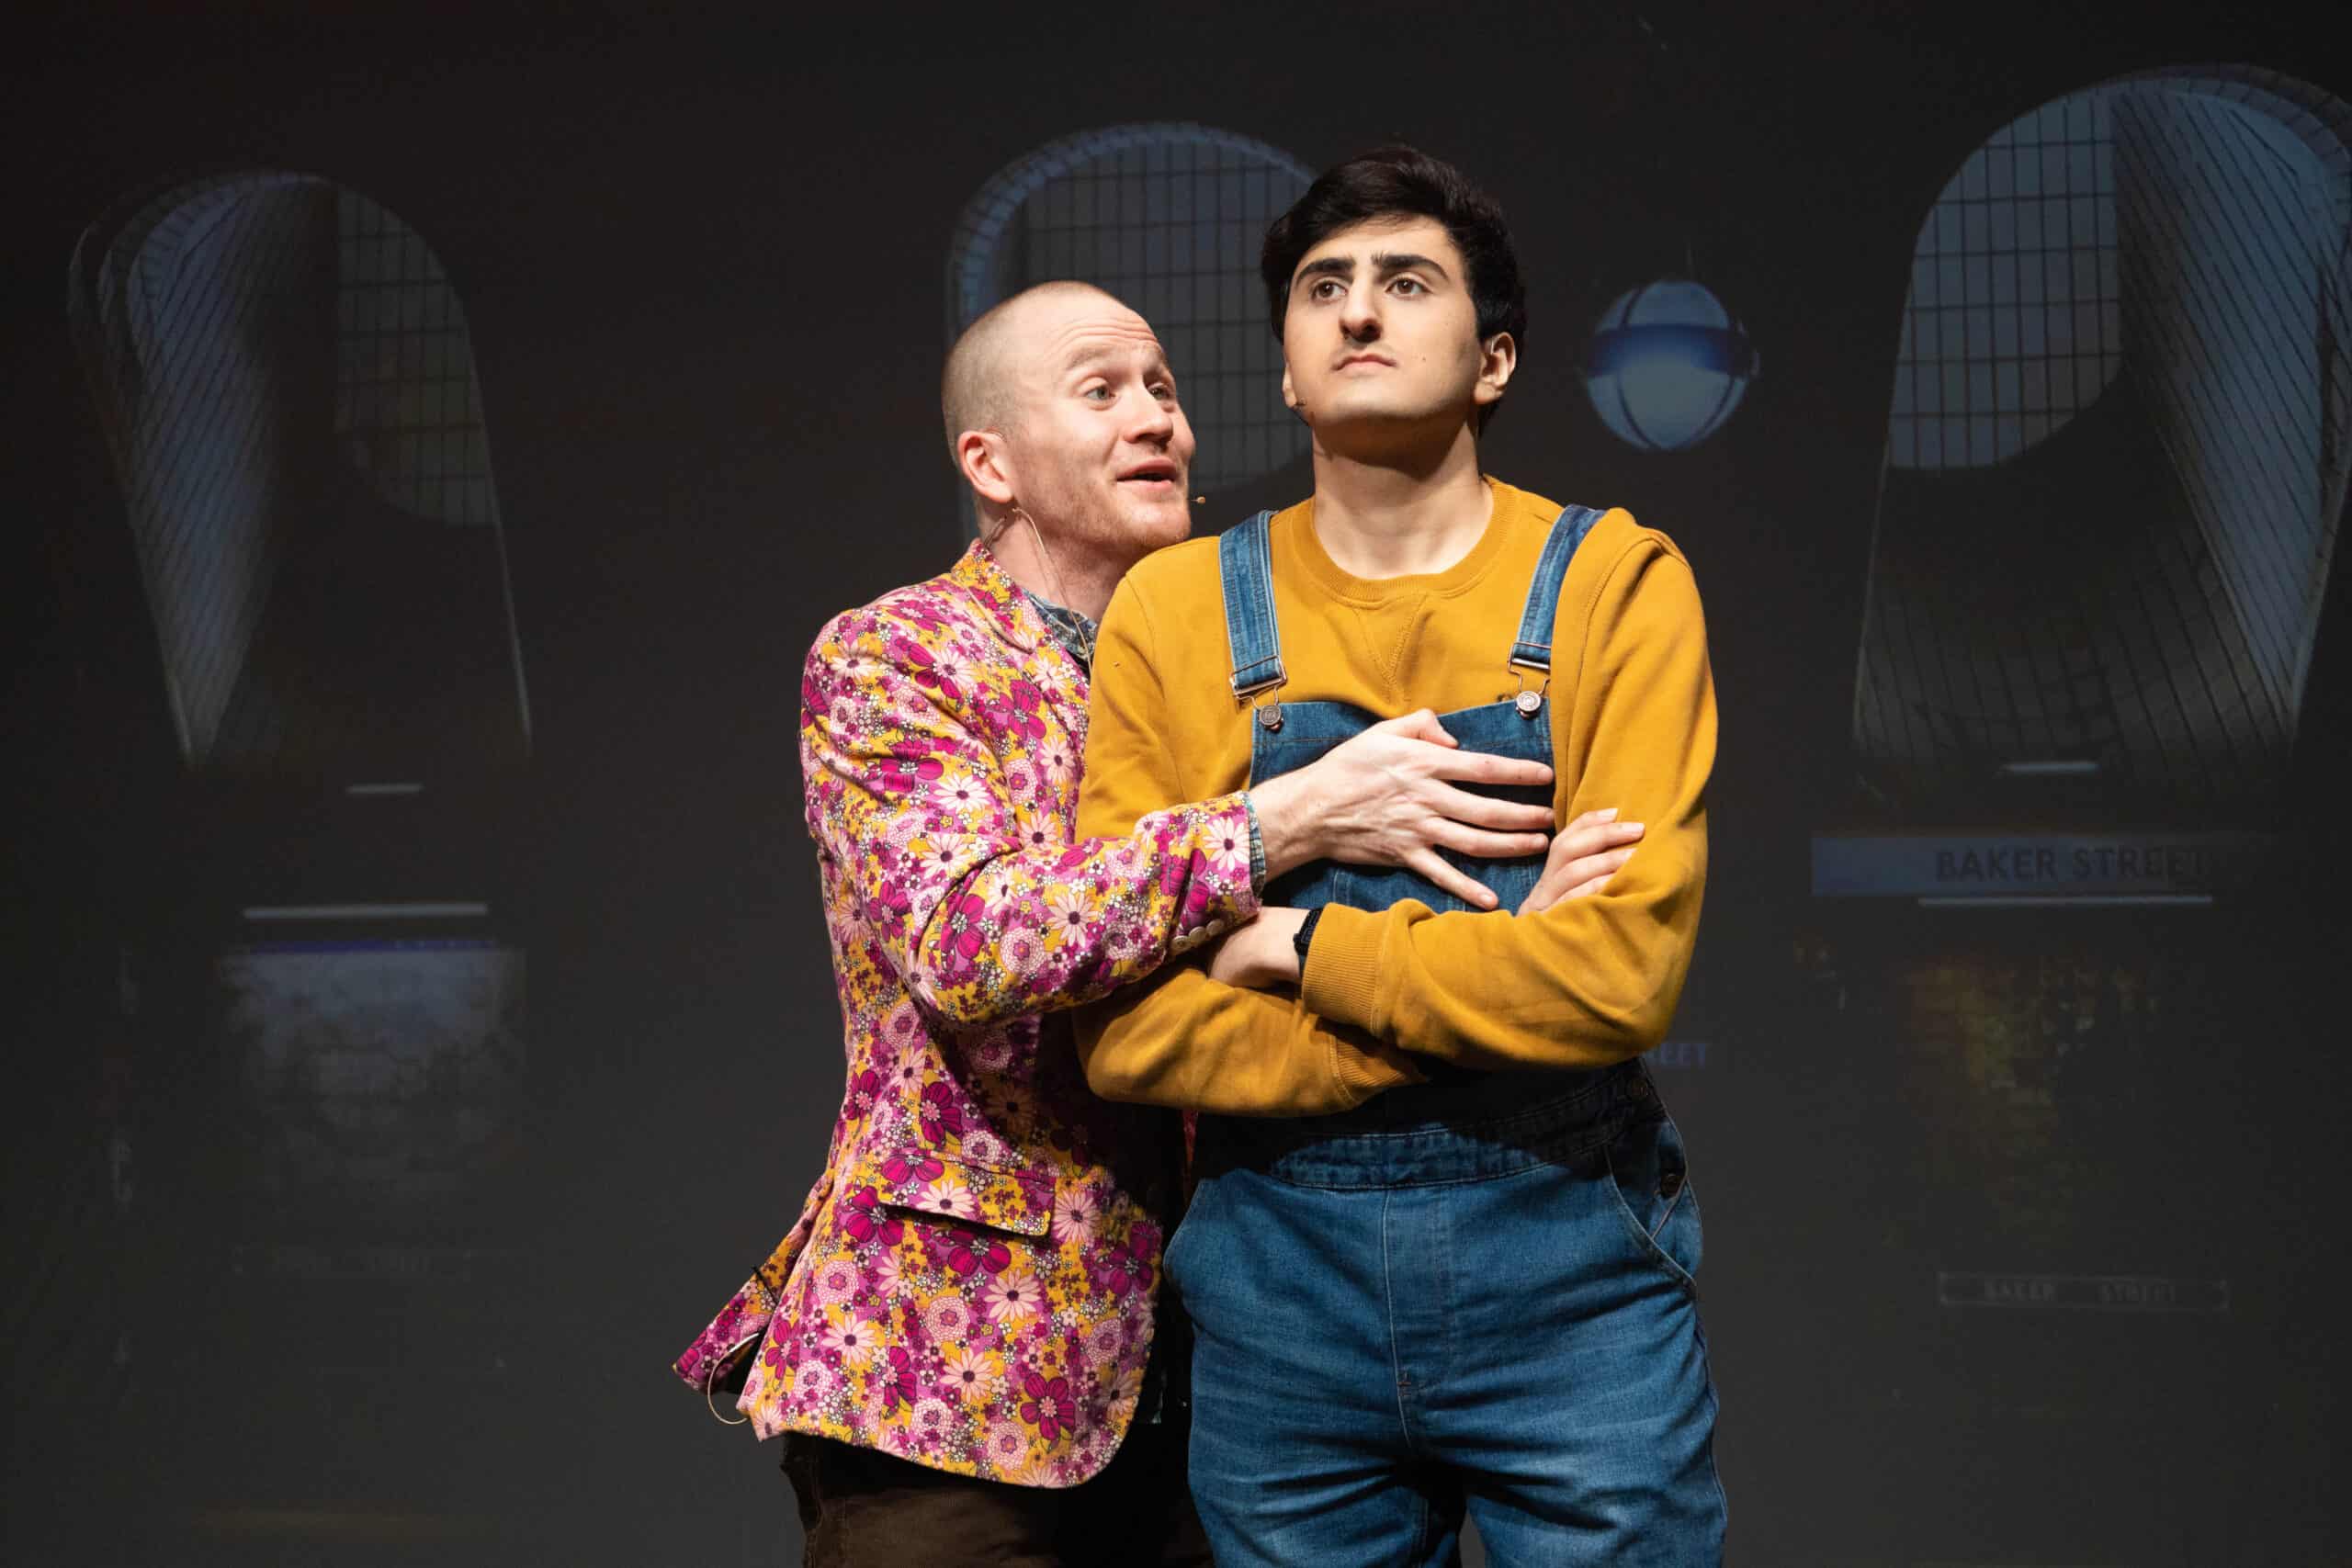 Sam Brewer & Aarian Mehrabani (Sam, a white man with closely shaved blonde hair wears a pink and yellow floral blazer and grasps a very resolute Aarian. Aarian is a Middle Eastern man with slim build, clean shaven with short jet black quiffed hair. He is wearing a yellow jumper and denim dungarees).